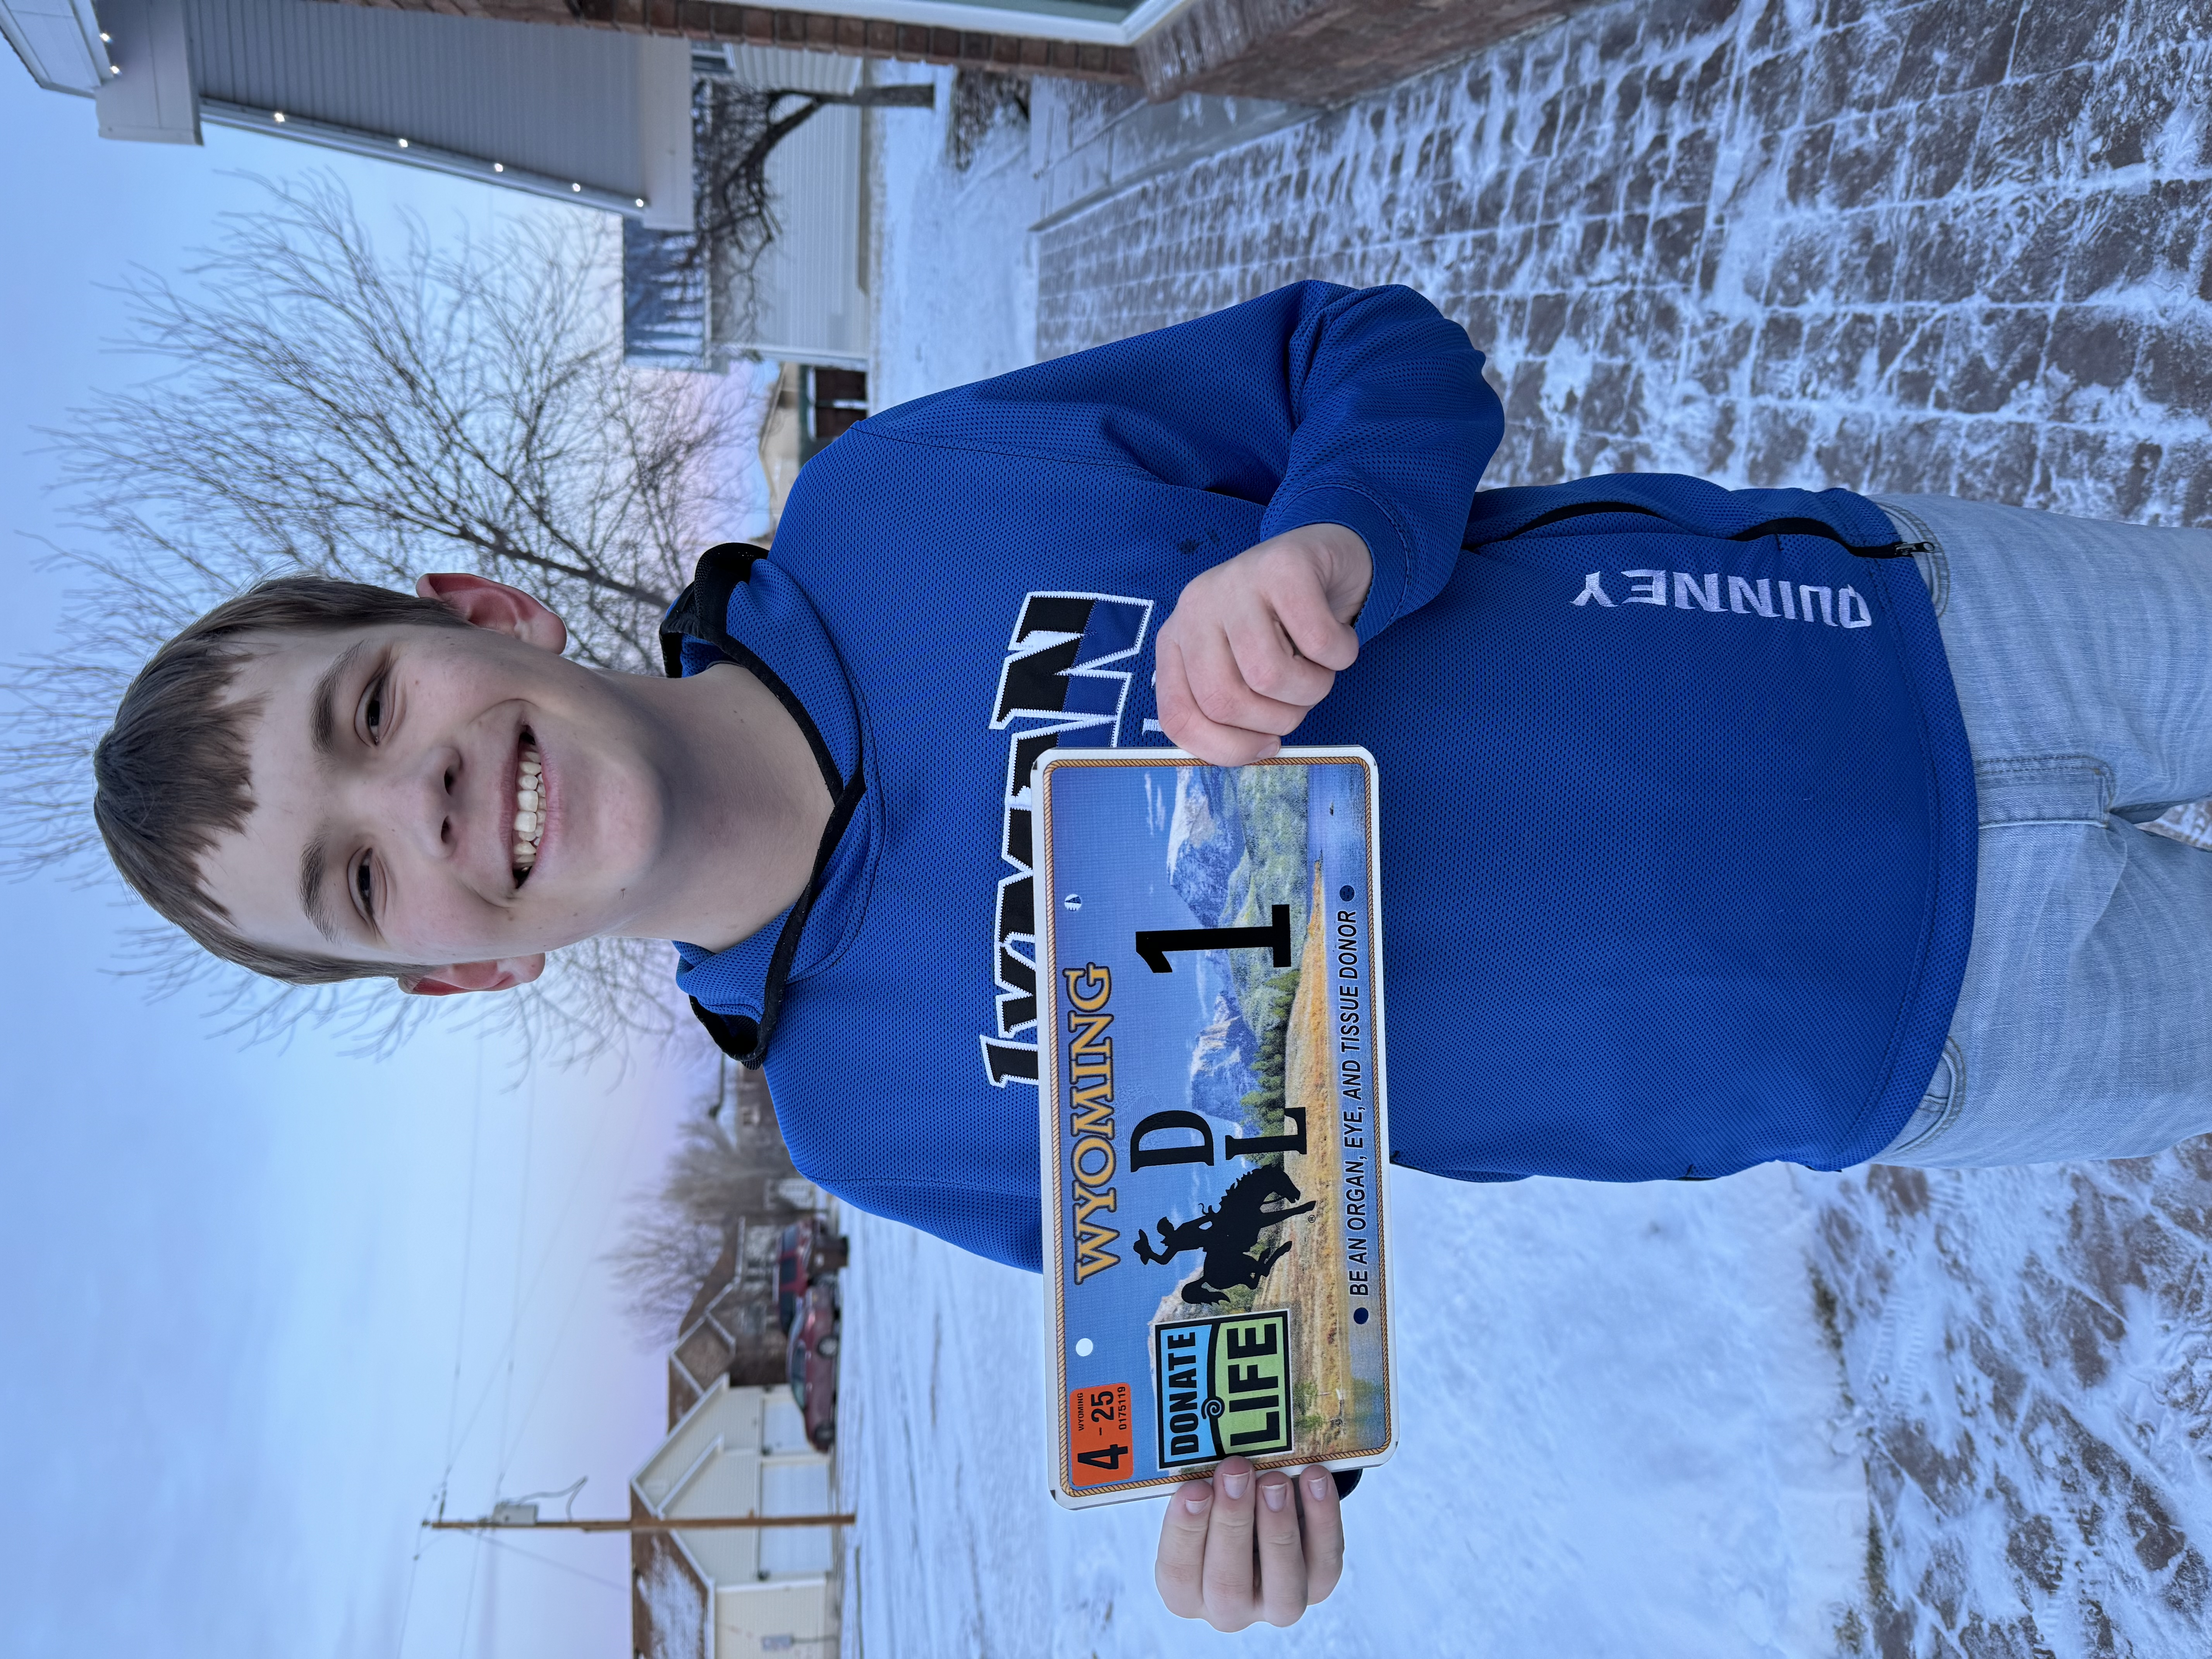 Bryson Quinney heart transplant recipient holding Donate Life Wyoming license plate number 1